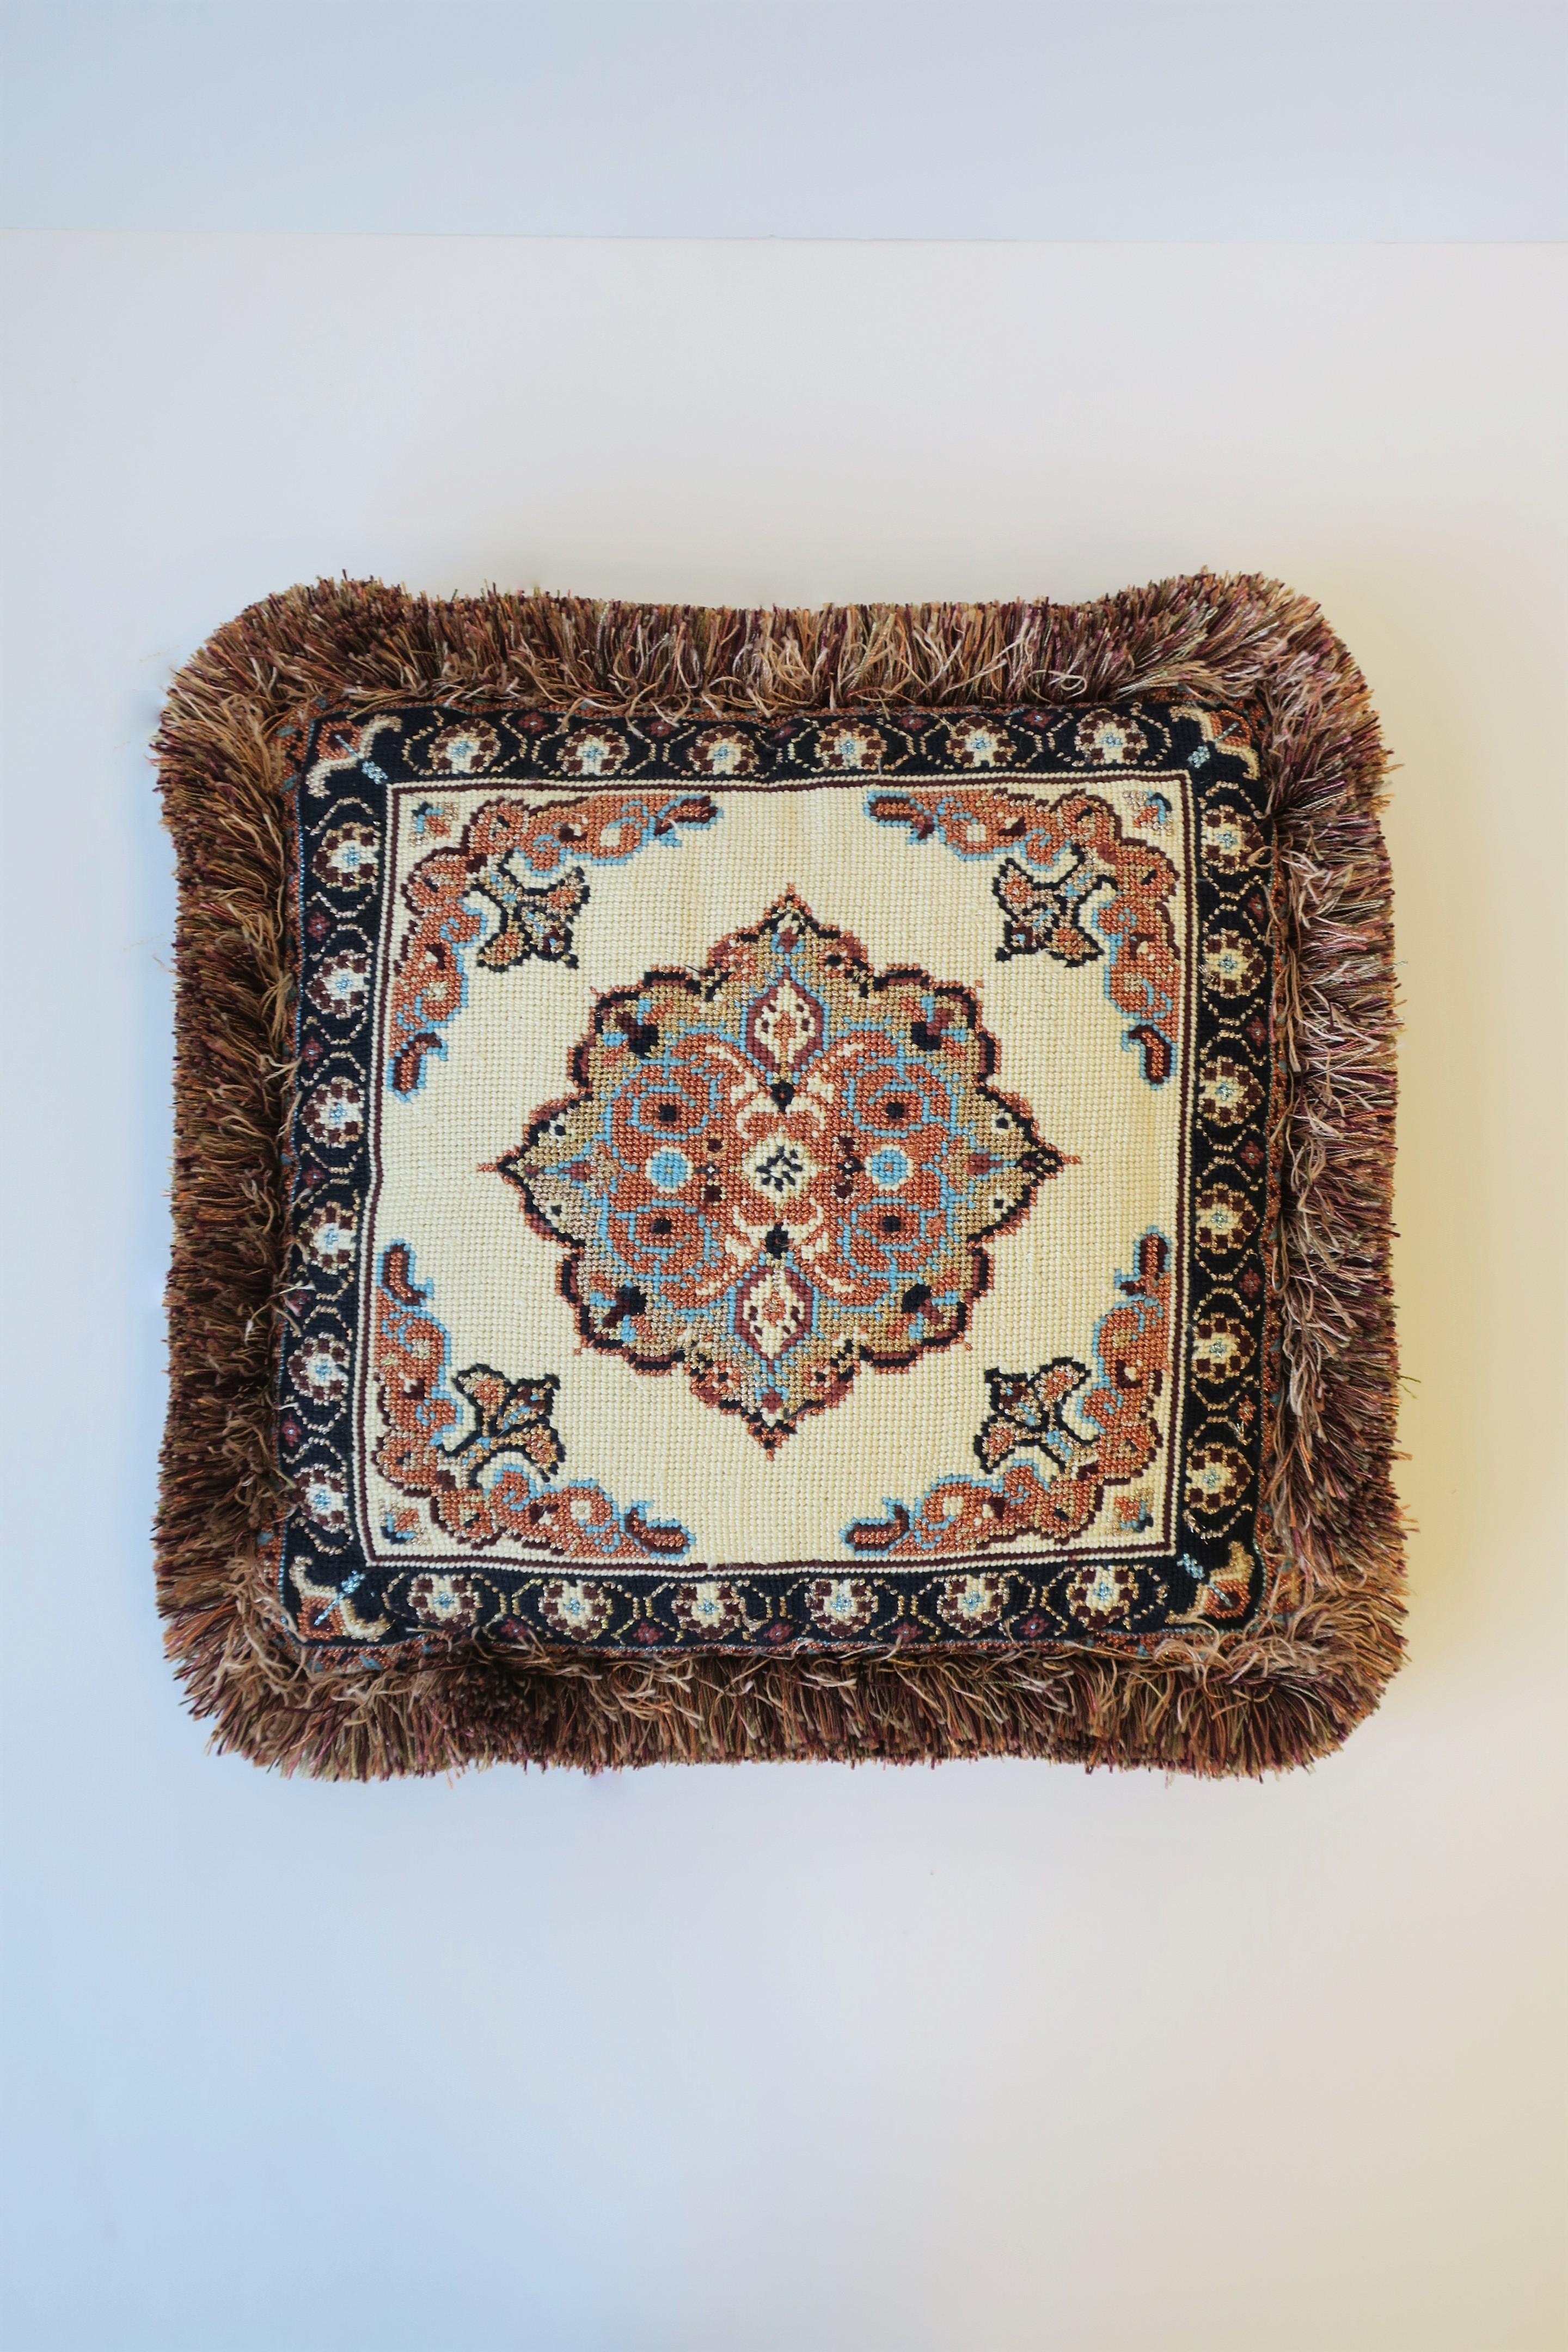 A beautiful handmade needlepoint pillow with a Moroccan/Moorish design style, circa 21st century. Pillow has a beautiful center medallion, detailed corners, fringe edge, and an orange silk back. Colors include turquoise blue, metallic sand/tan,